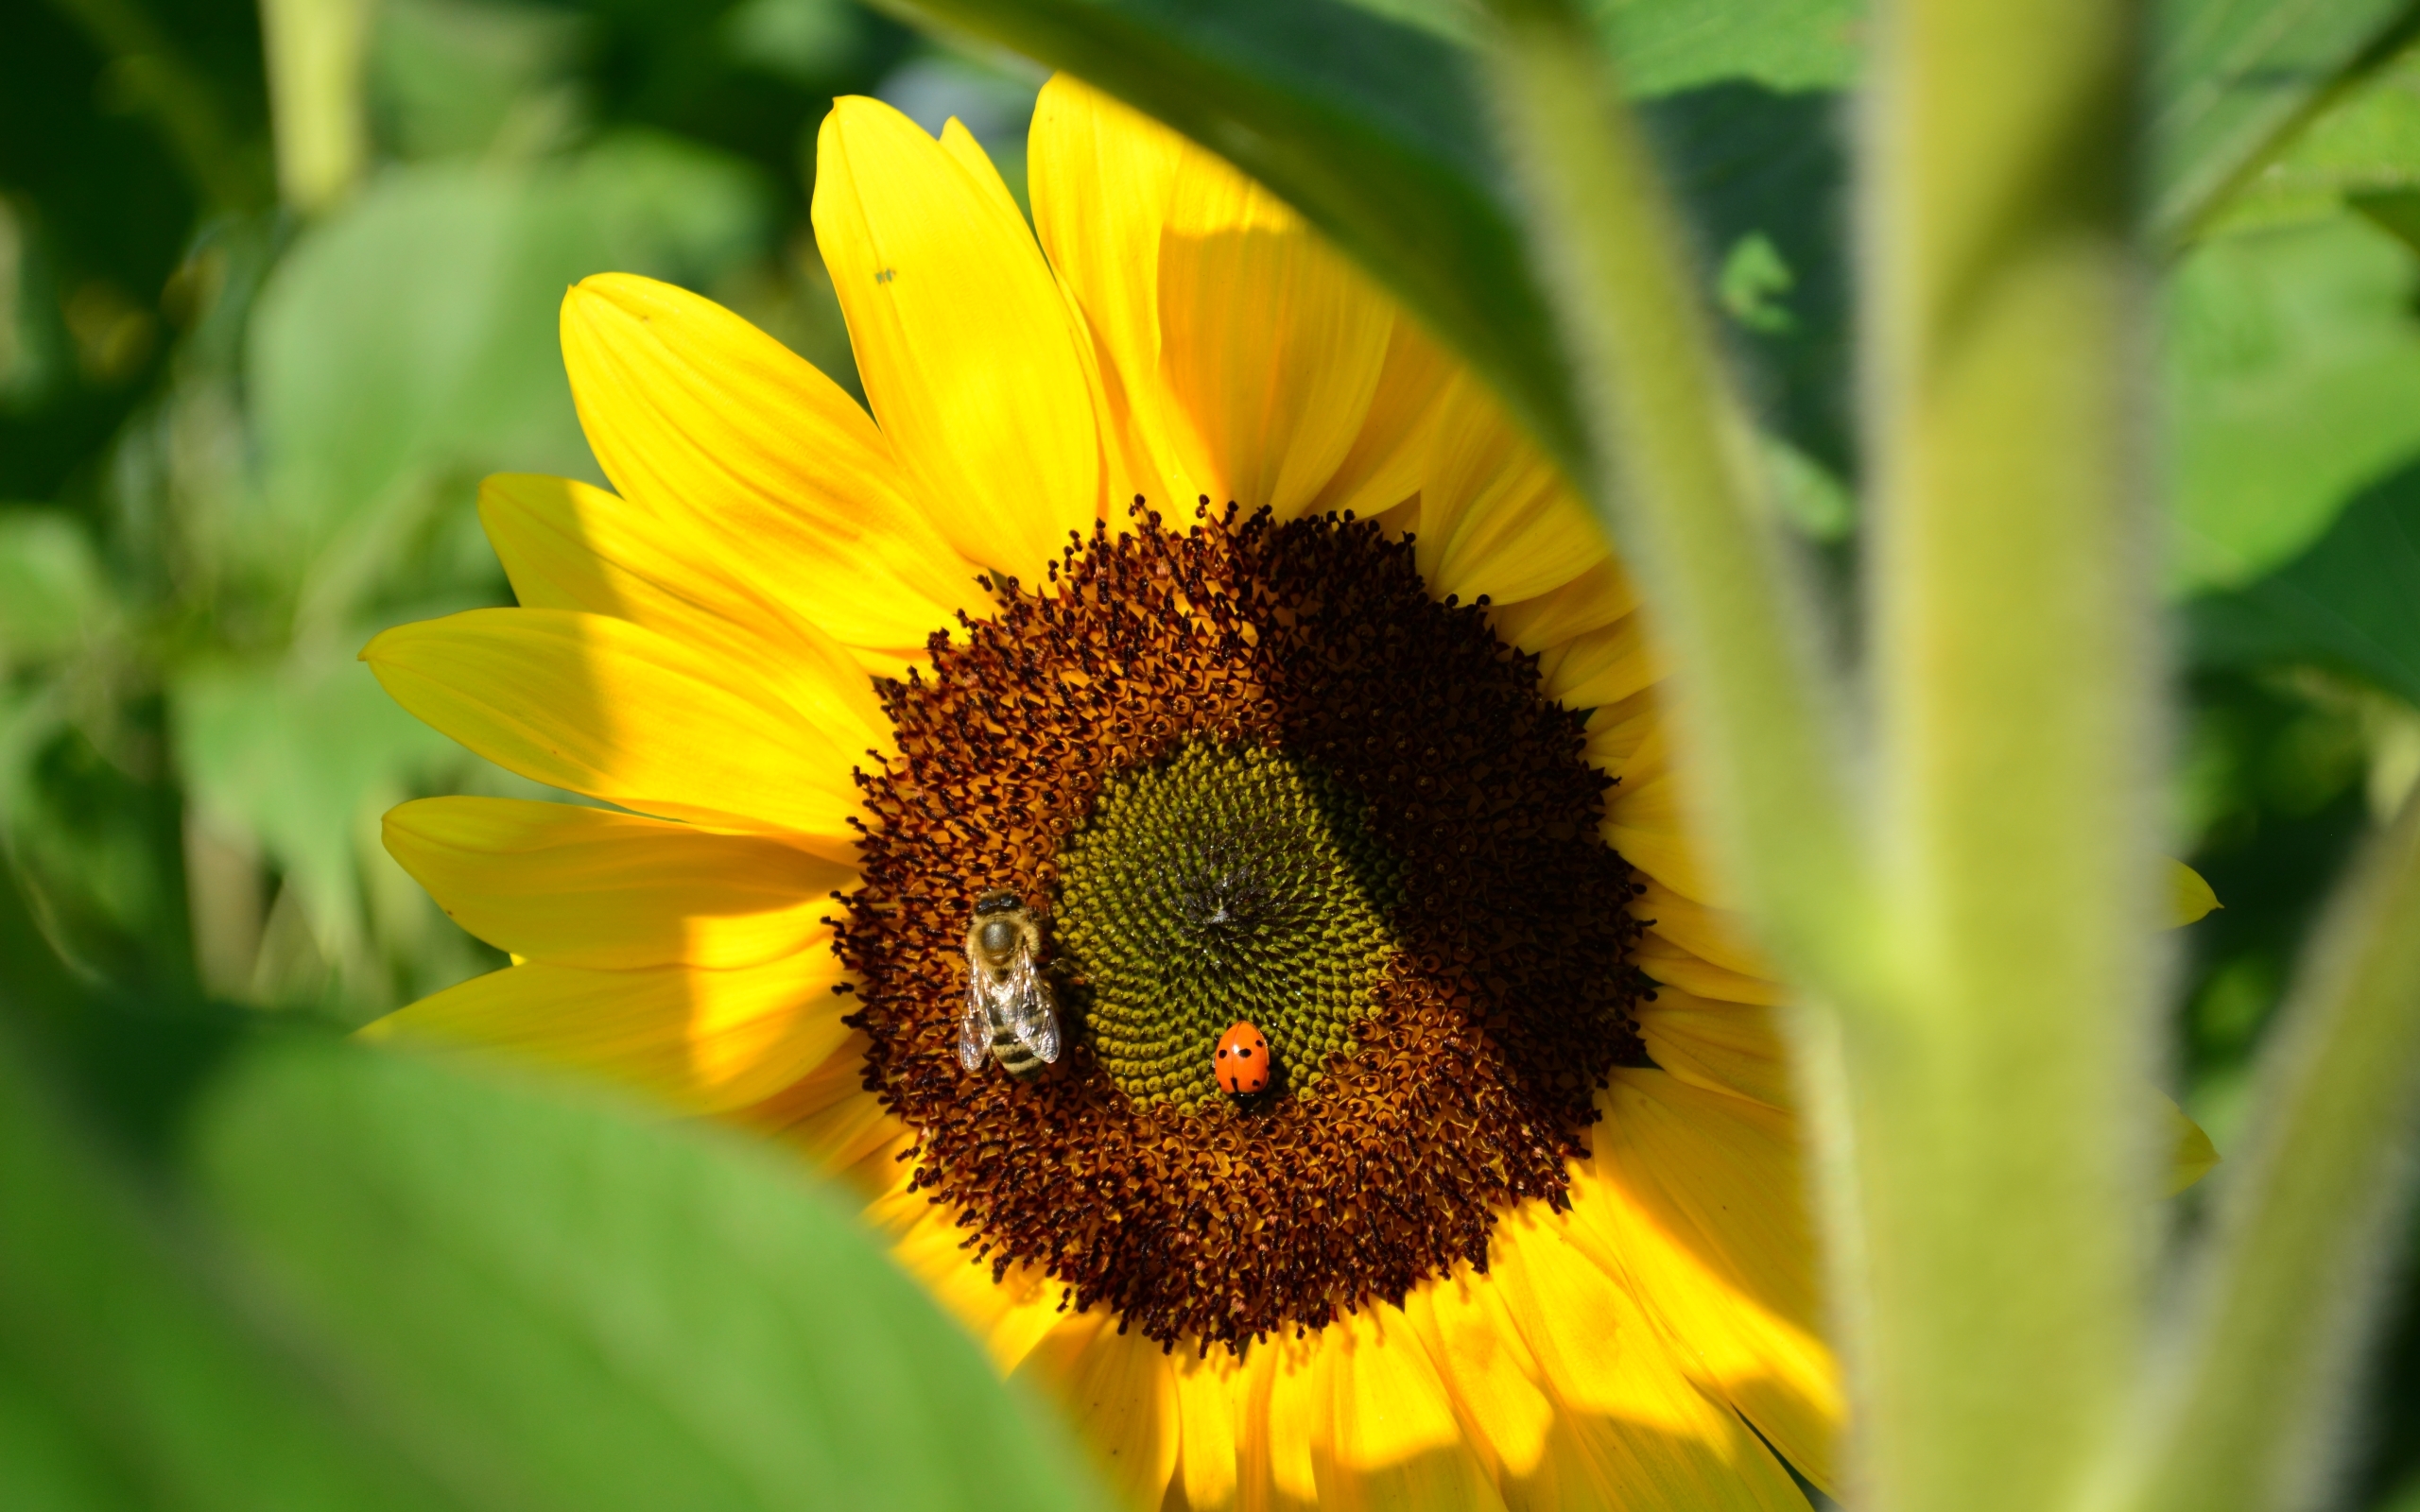 plants, flowers, insects, sunflowers, bees, ladybugs